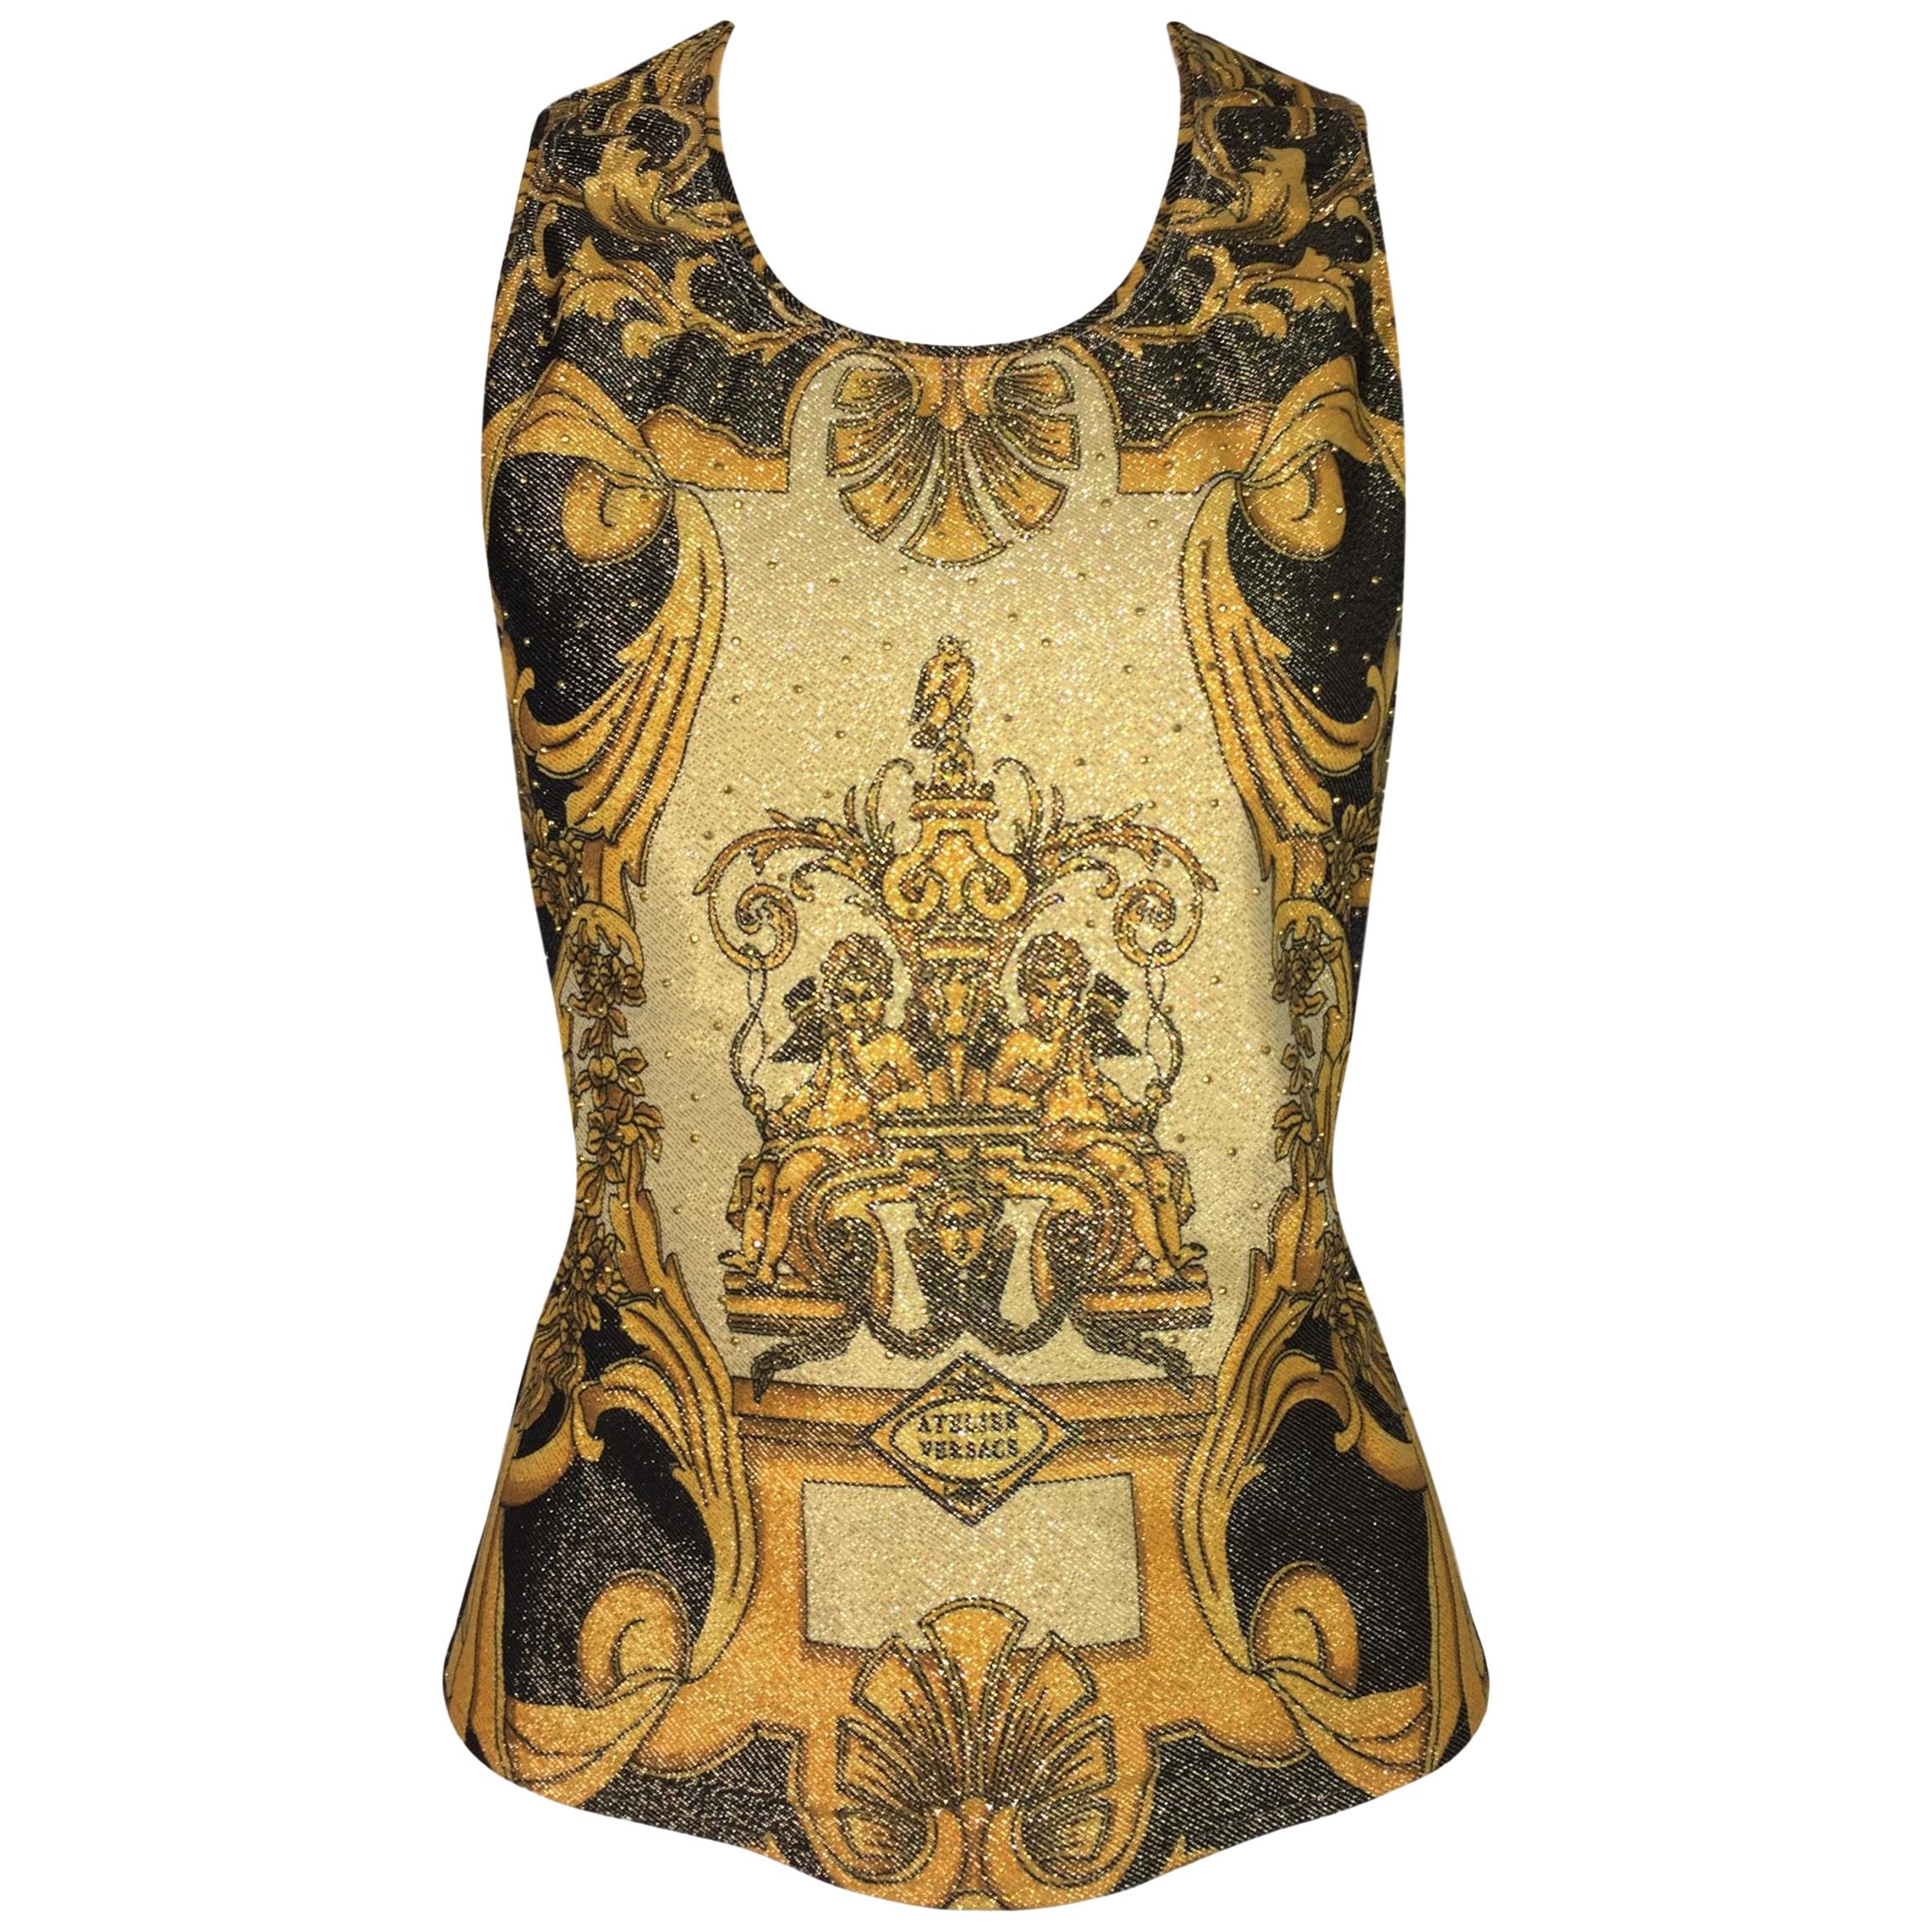 S/S 1992 Gianni Versace Atelier Print Gold Studded Baroque Top